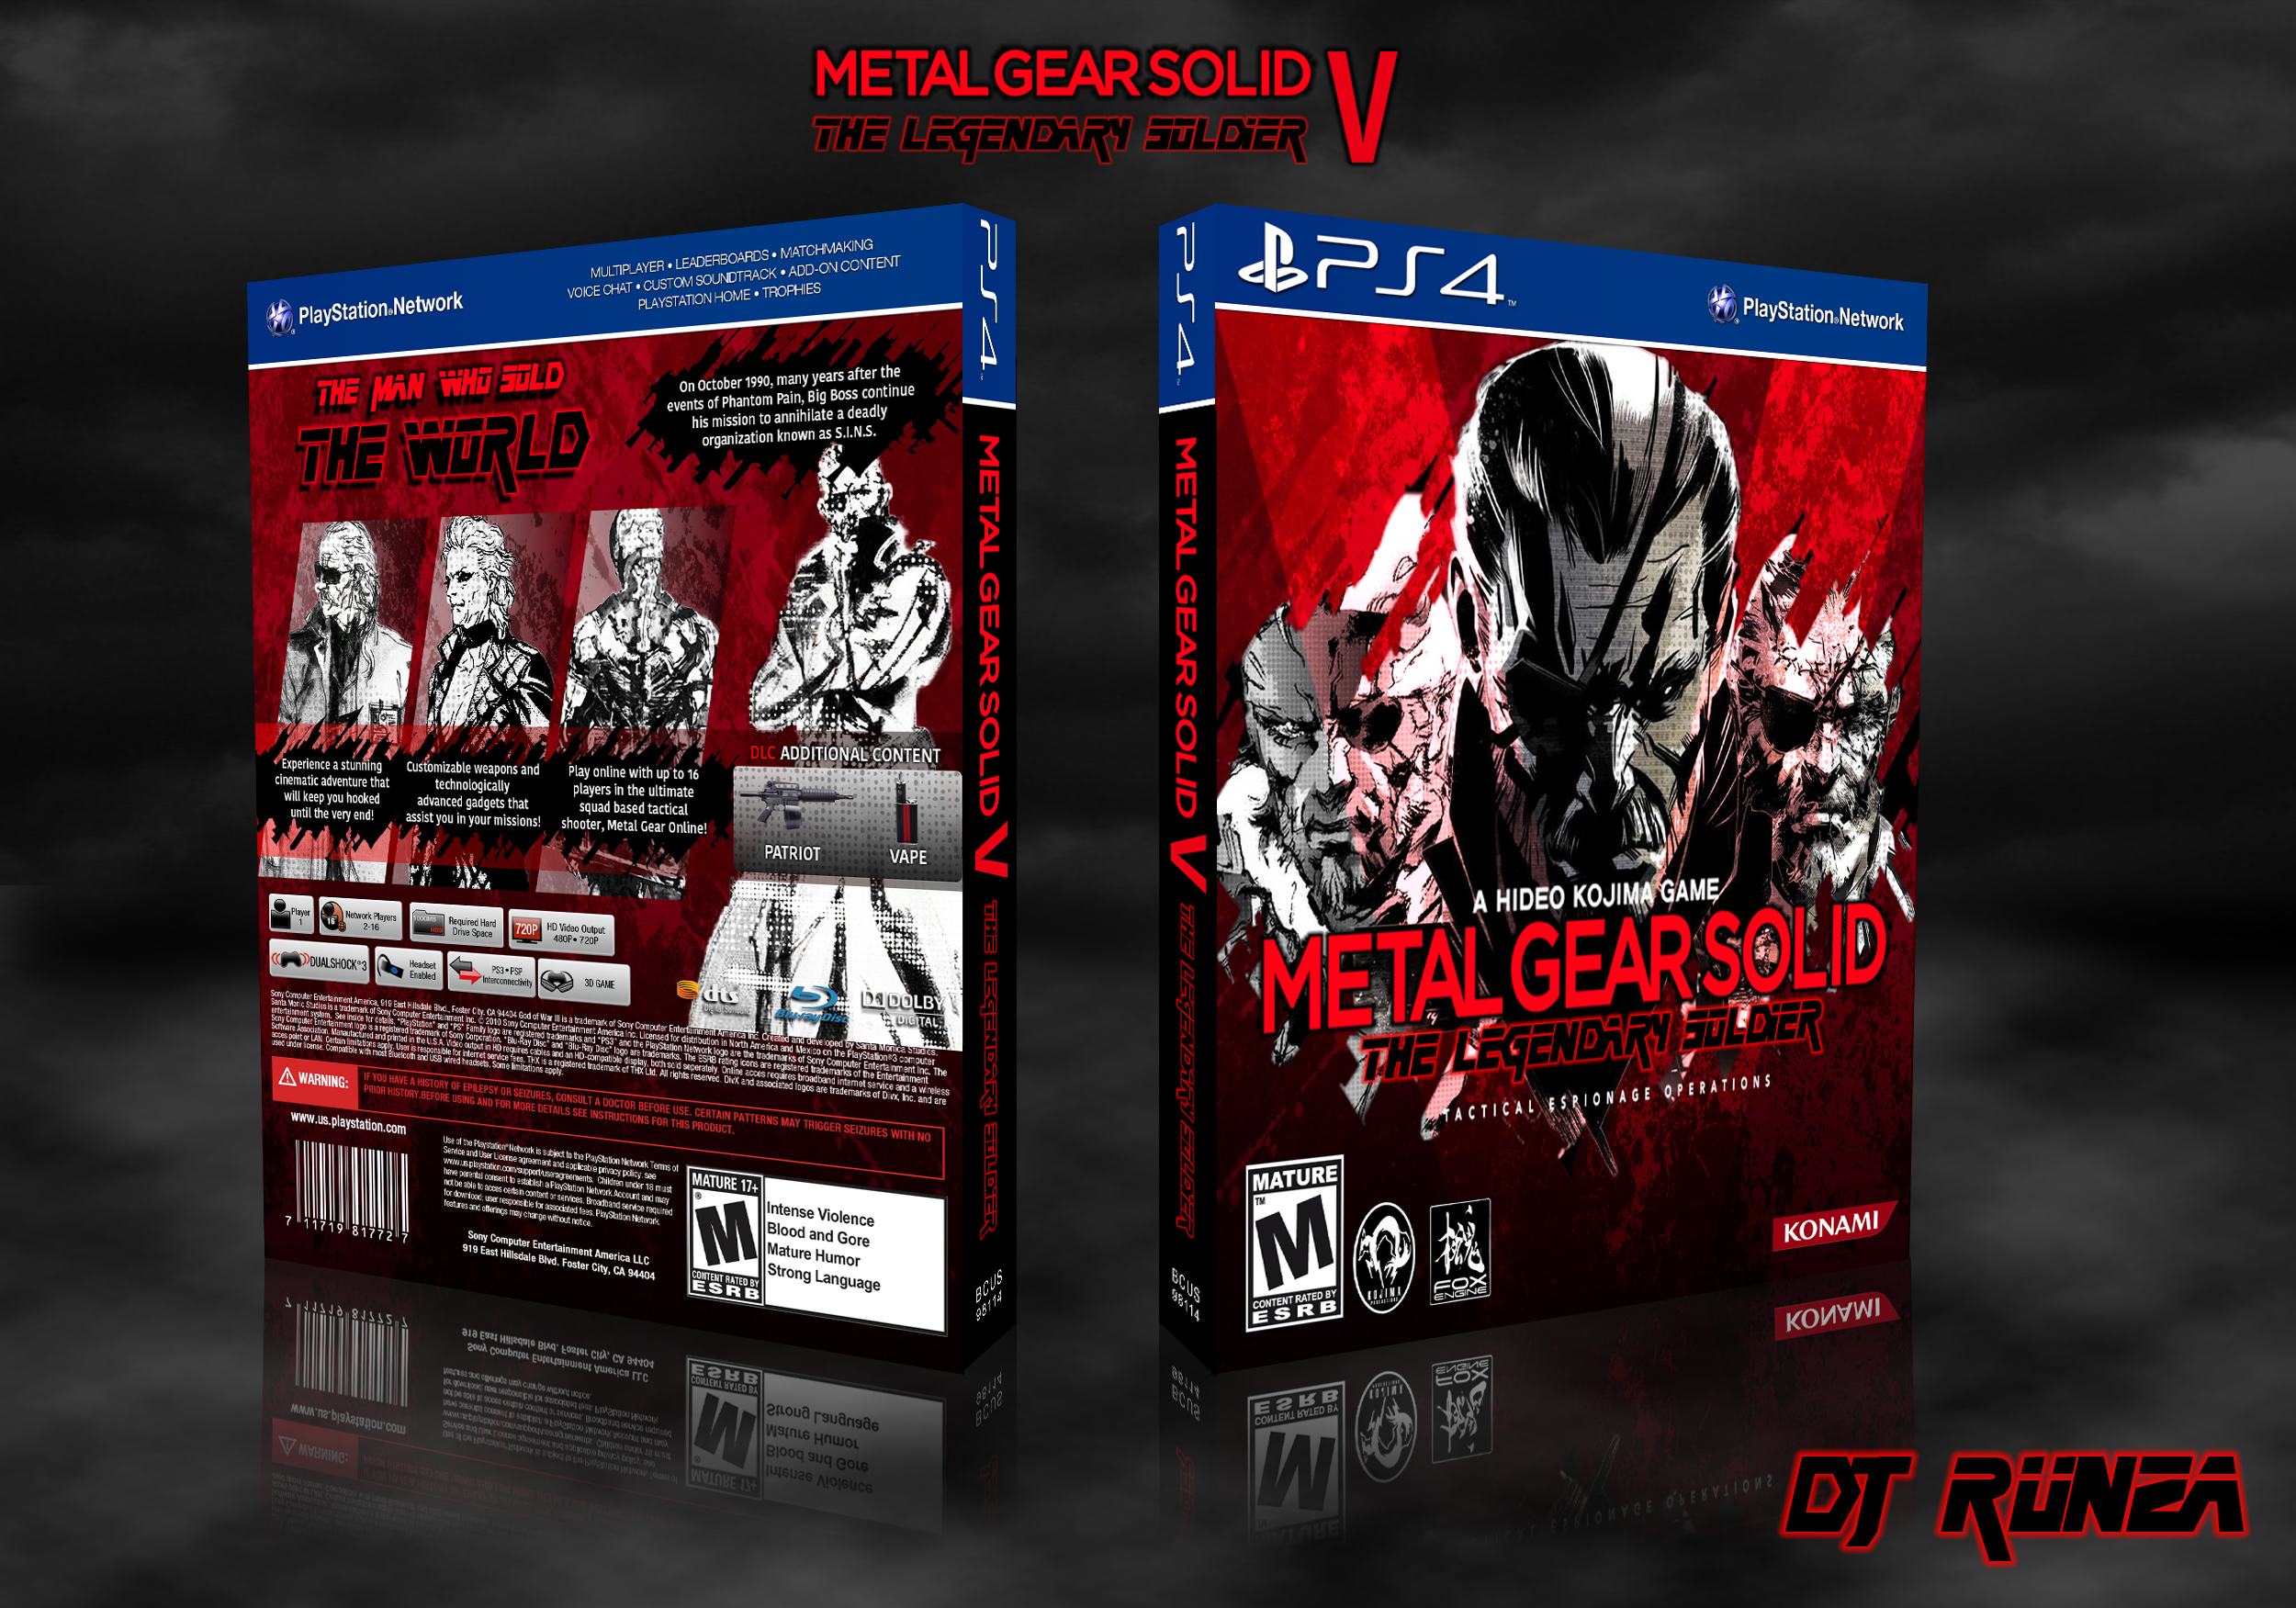 Metal Gear Solid V: The Legendary Soldier box cover